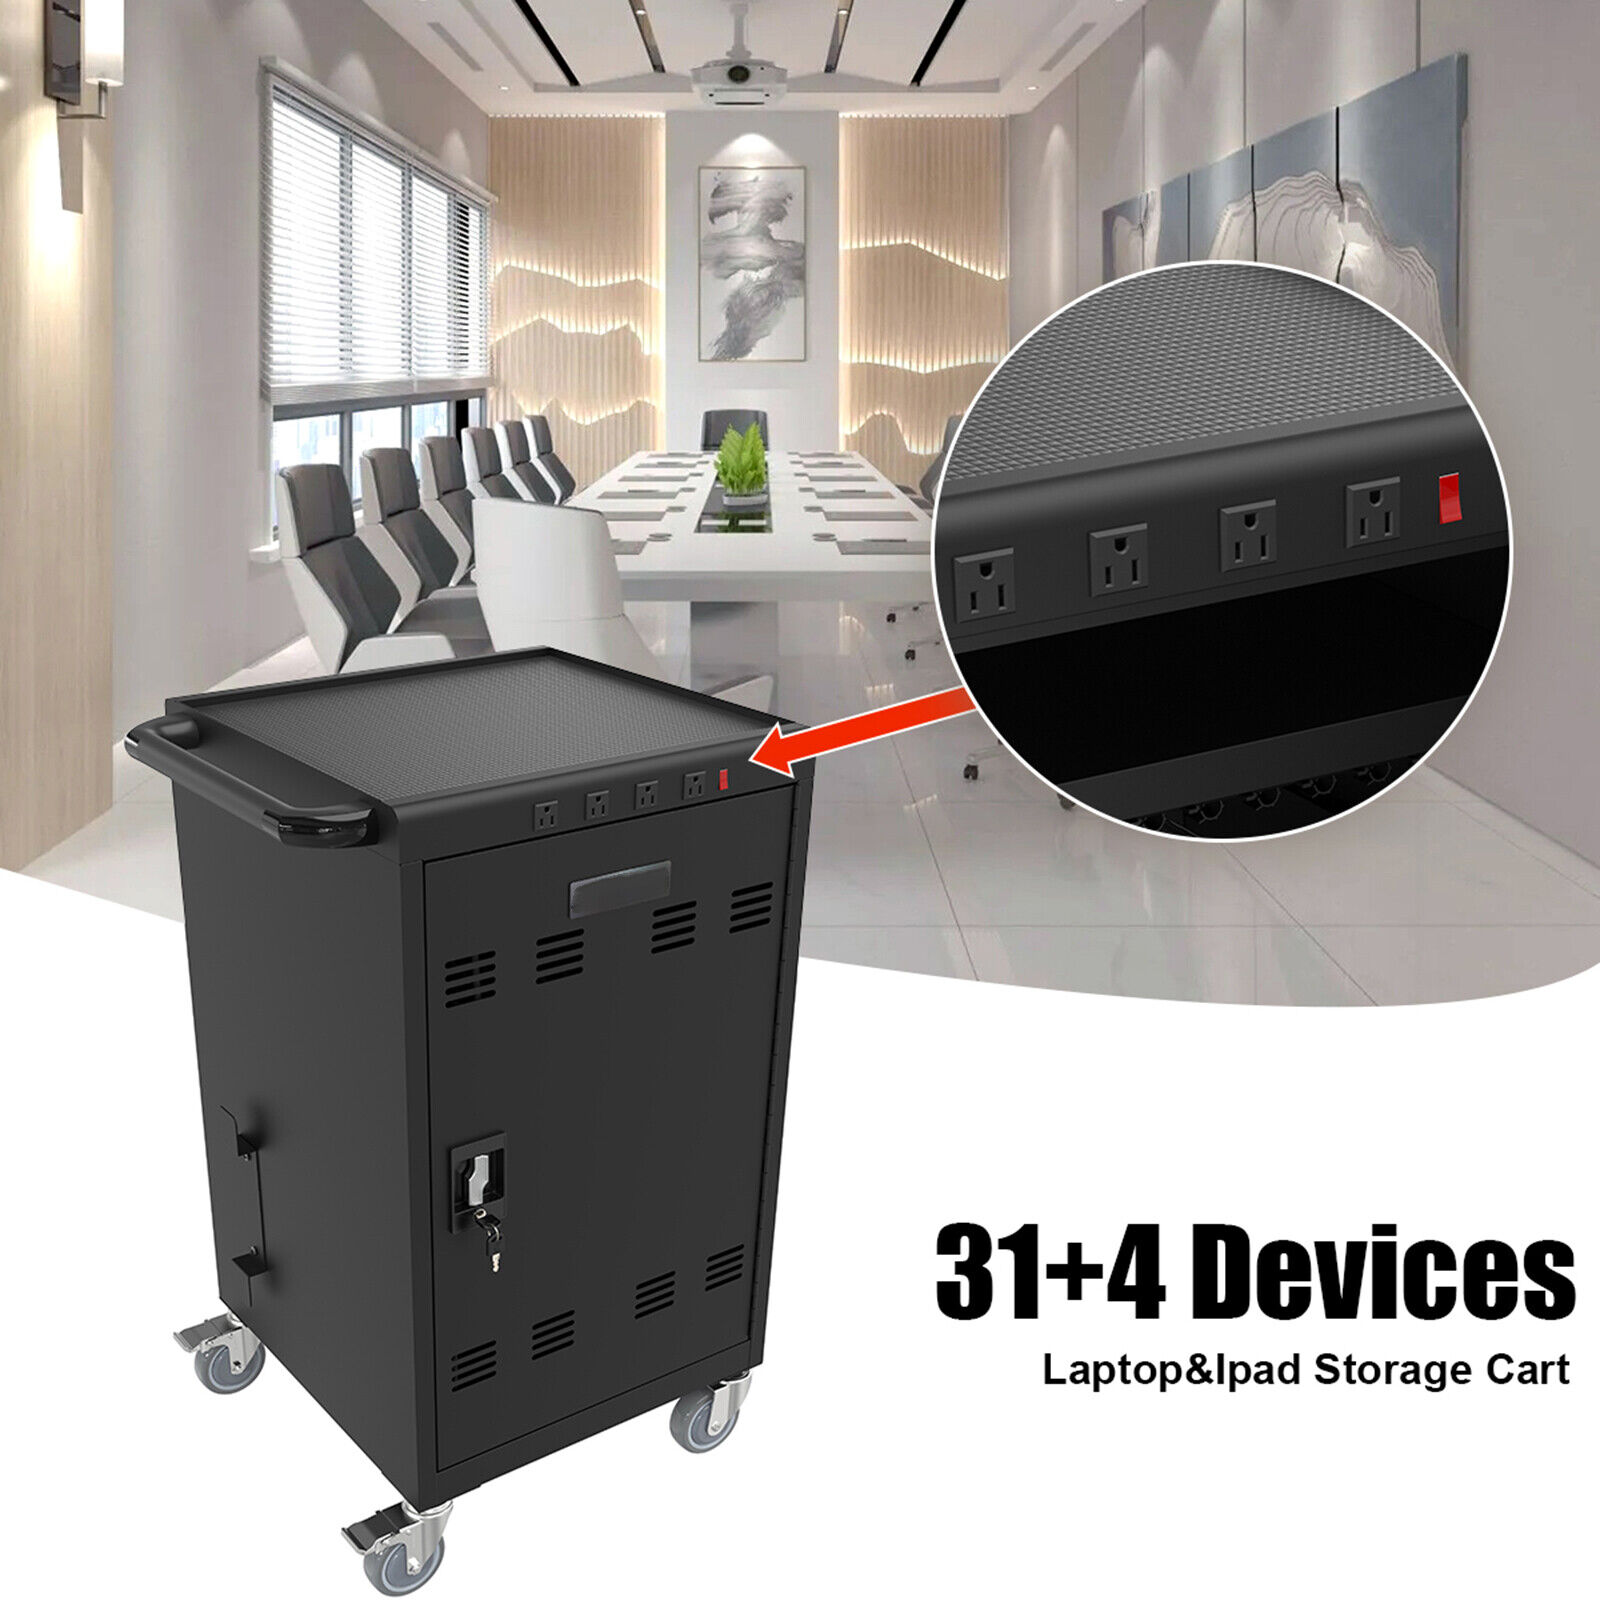 35 Device Mobile Charging Cart Storage Cabinet With Lock Key 2 Locking Casters